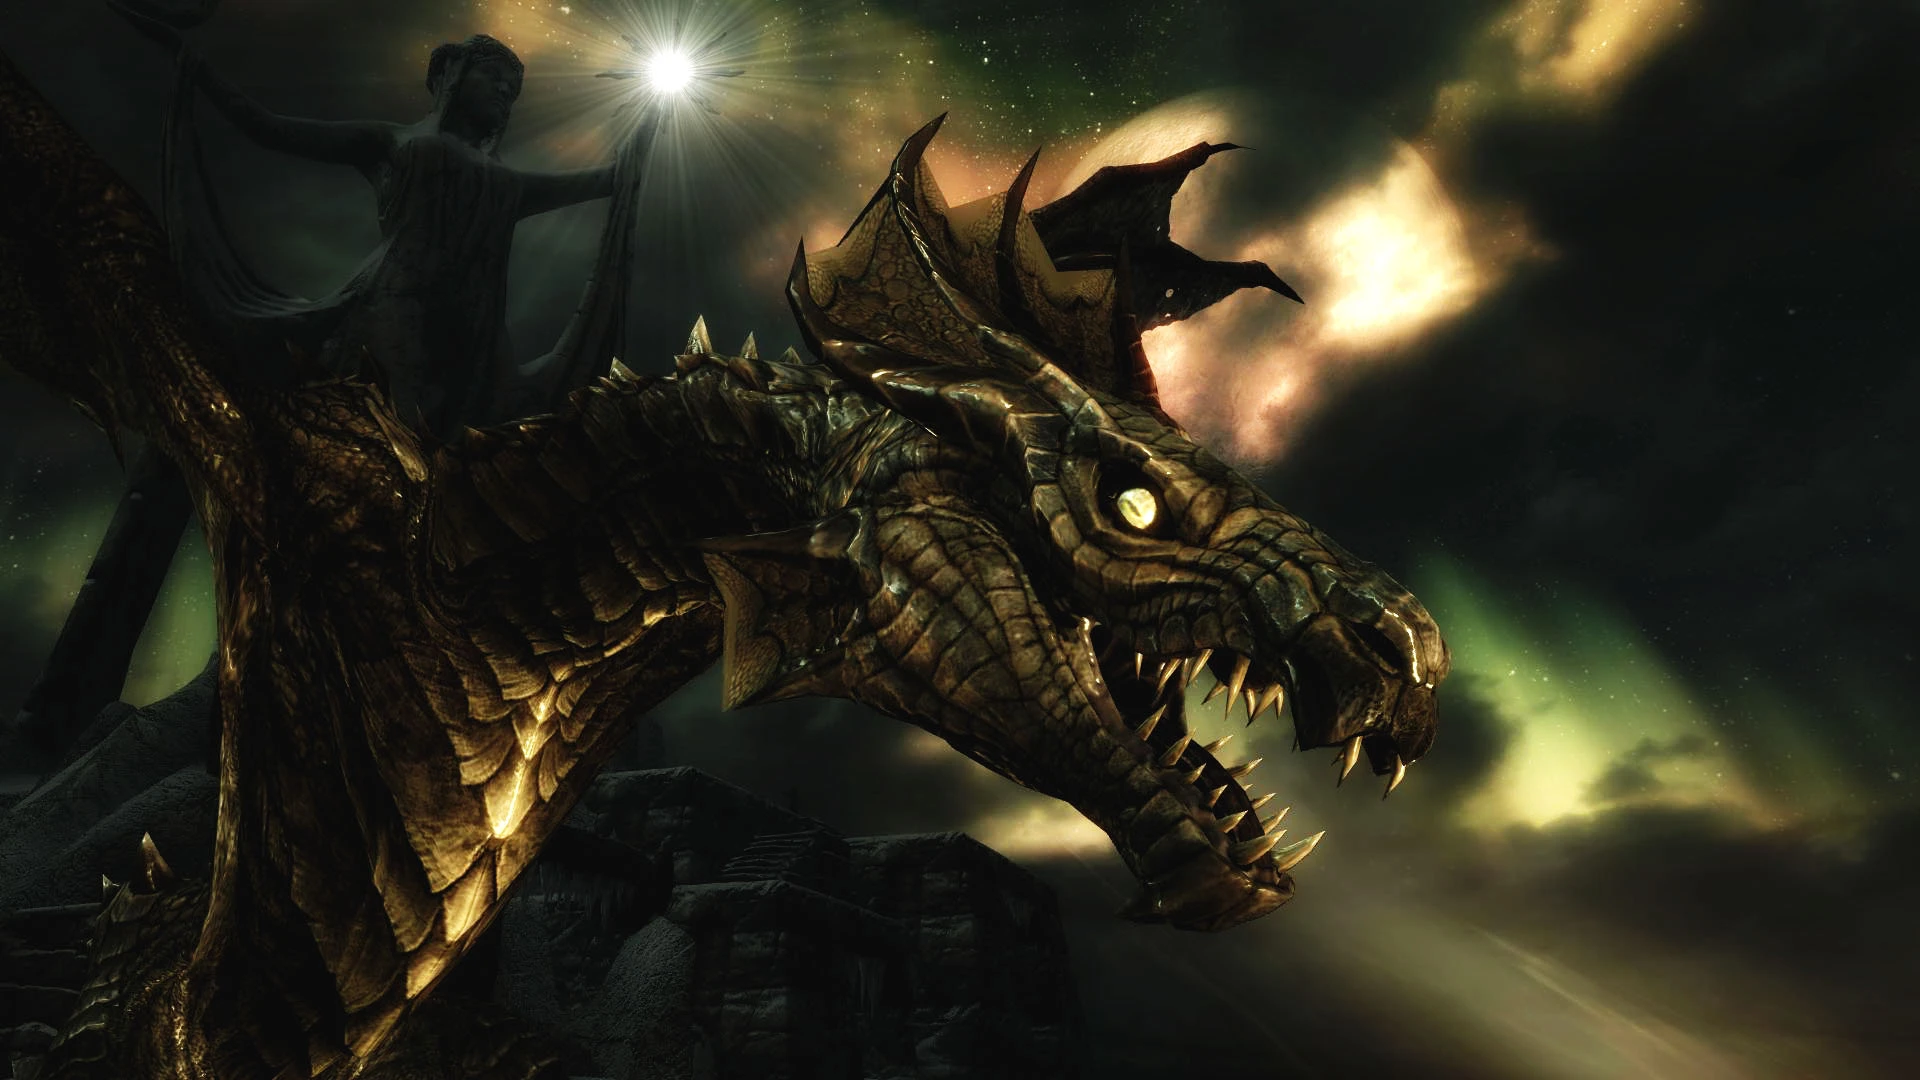 blood and dragon download free